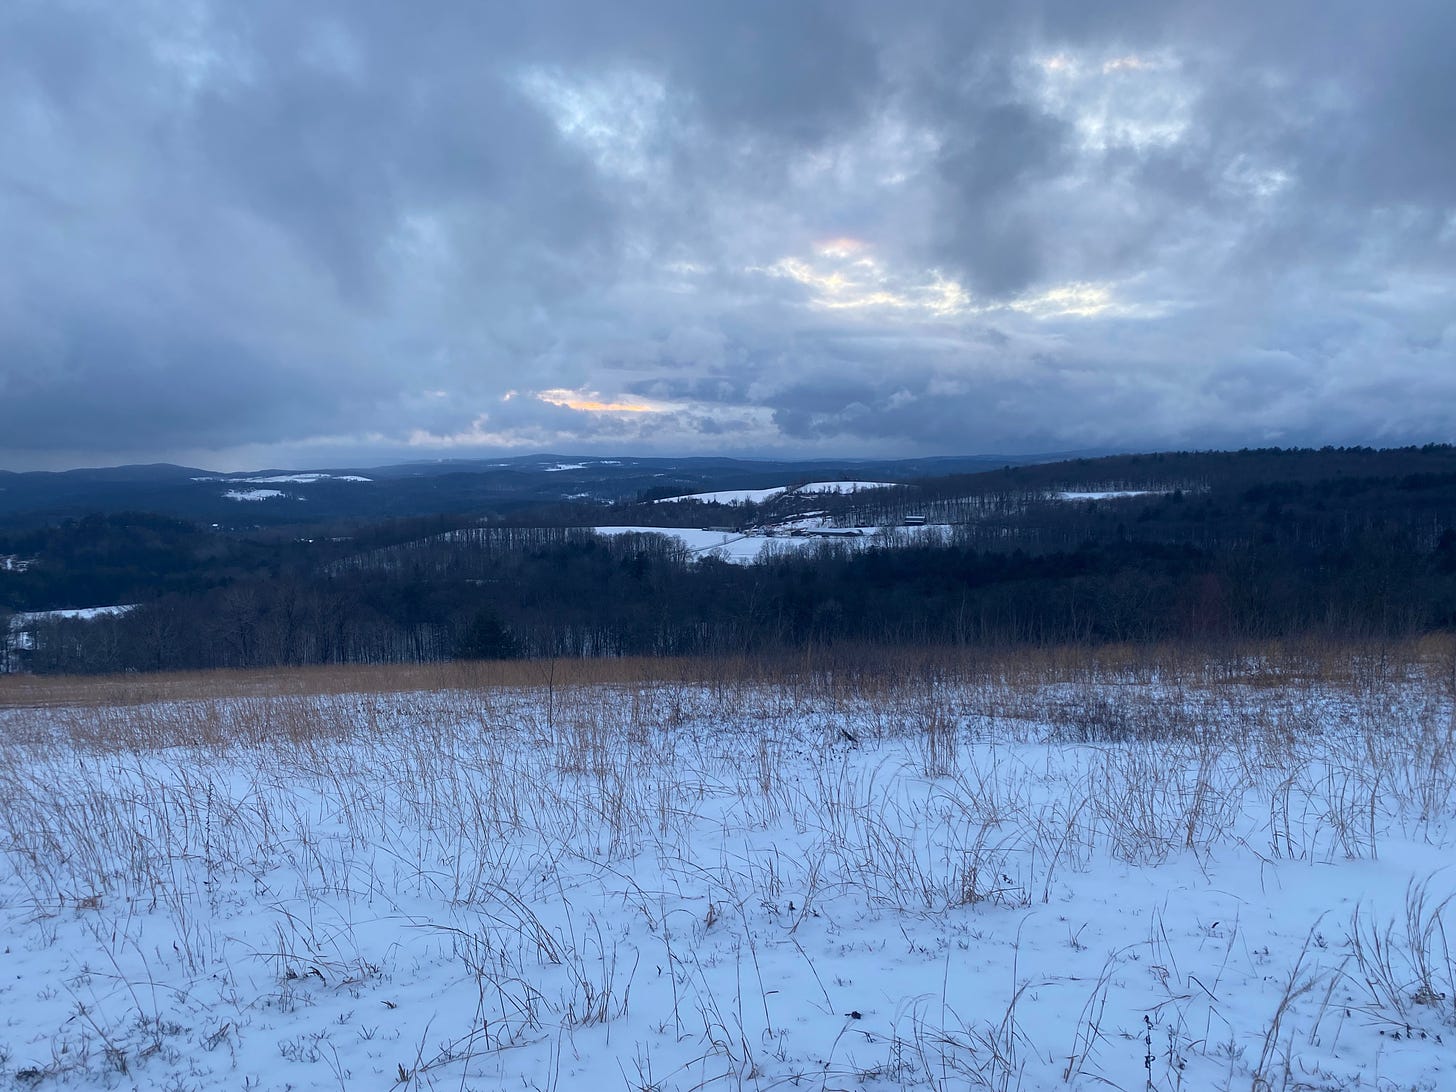 A snowy ridgetop looking out over a view of dark forested hills and snow-covered fields. The sky is dark, full of big blue and purple clouds, and a small slice of orange light where the sun is peeking out.